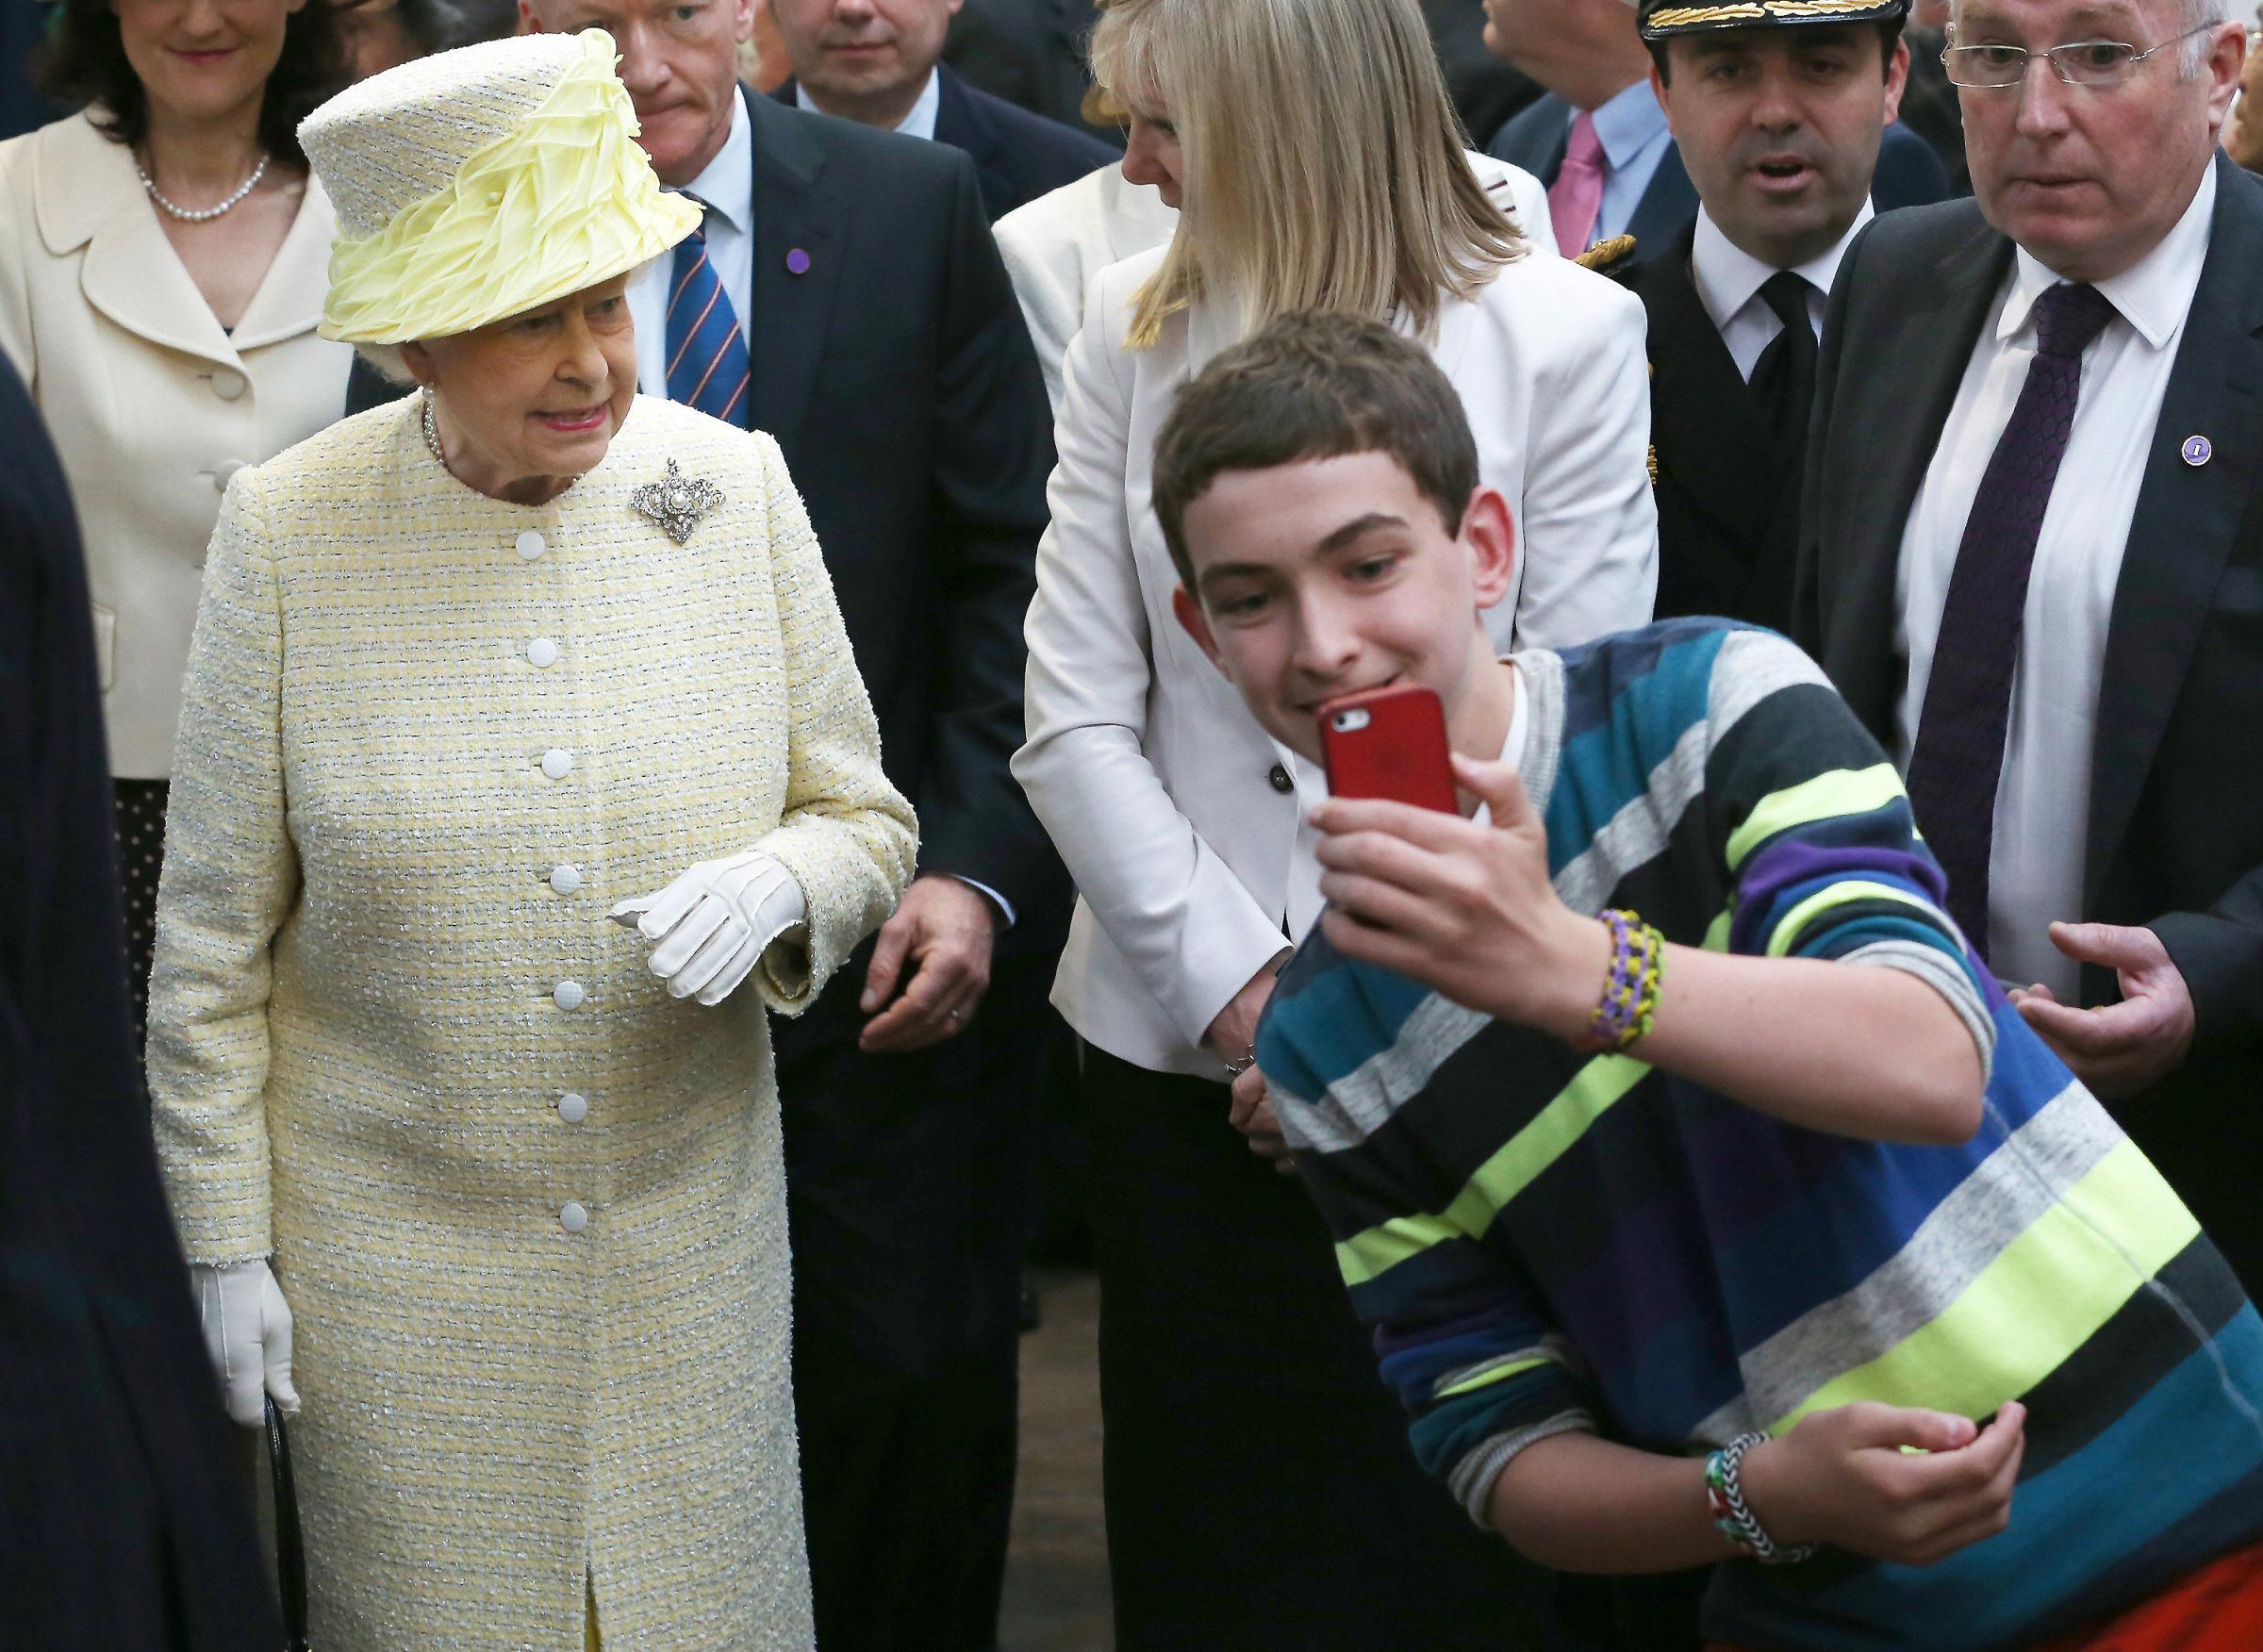 A teenager takes a selfie in front of Queen Elizabeth II during a walk around St. Georges Market in Belfast.